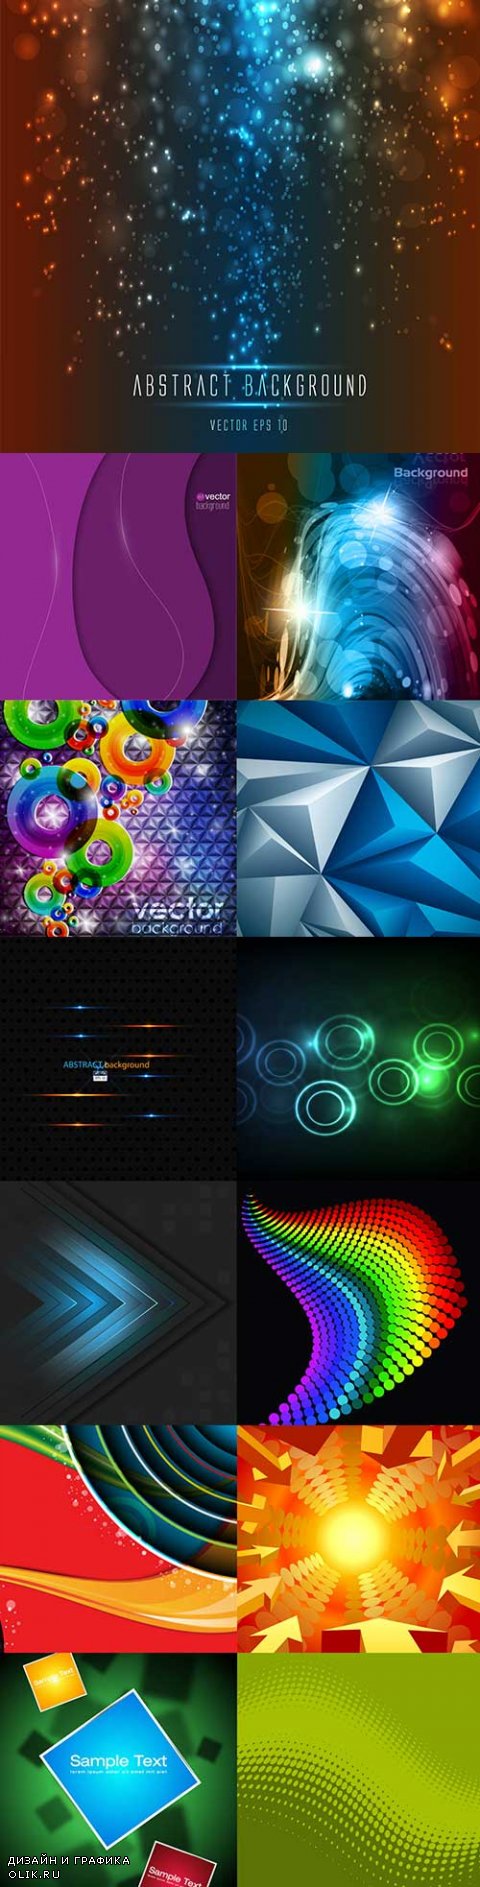 Bright colorful abstract backgrounds vector -50